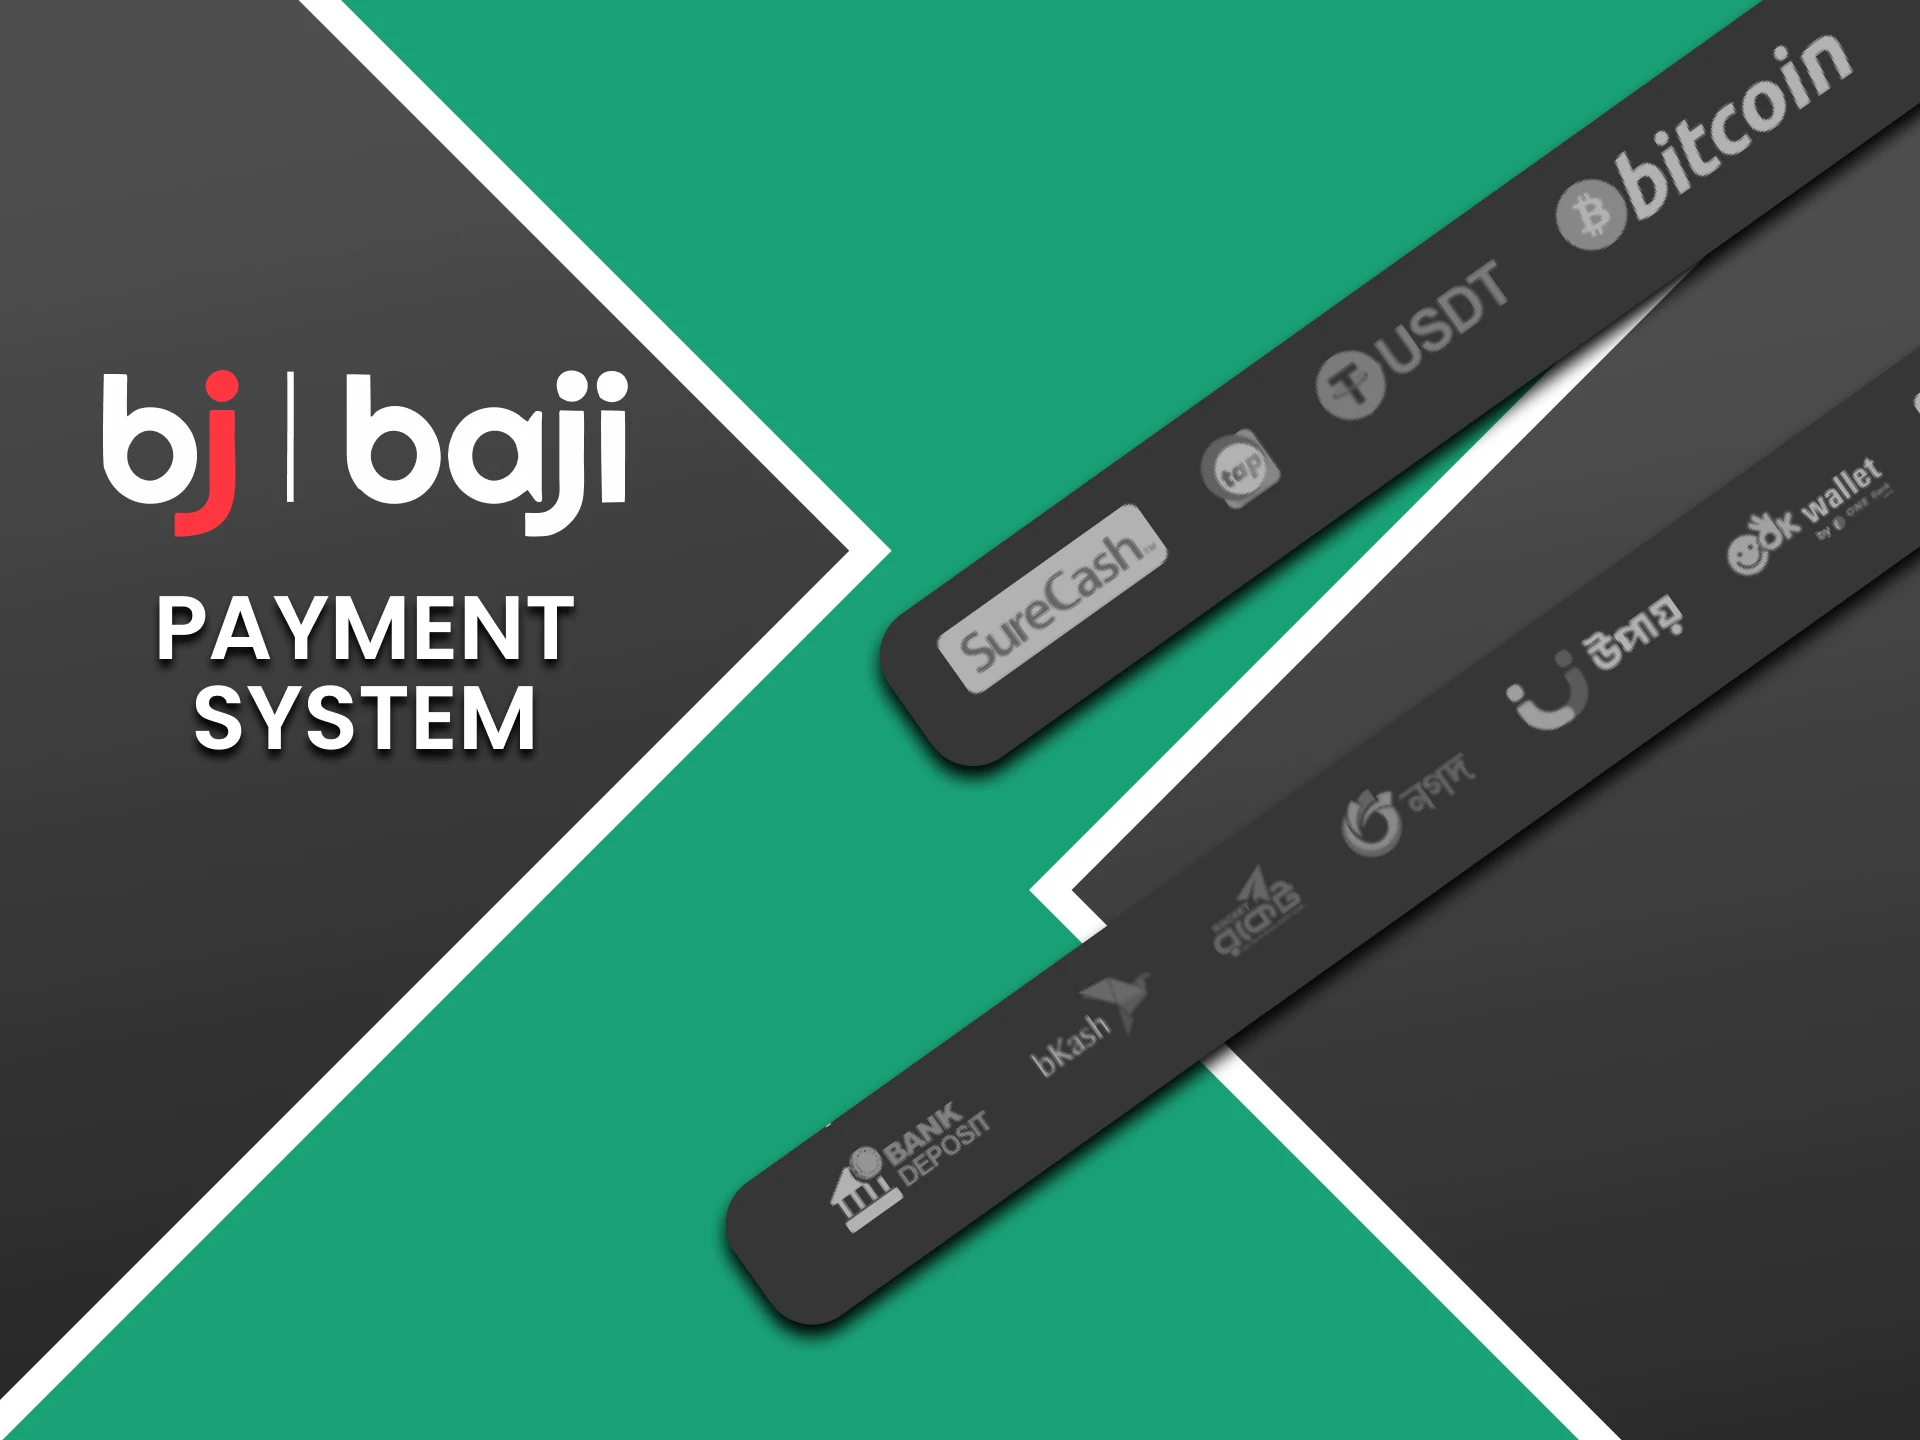 We will tell you what withdrawal methods are available on Baji.